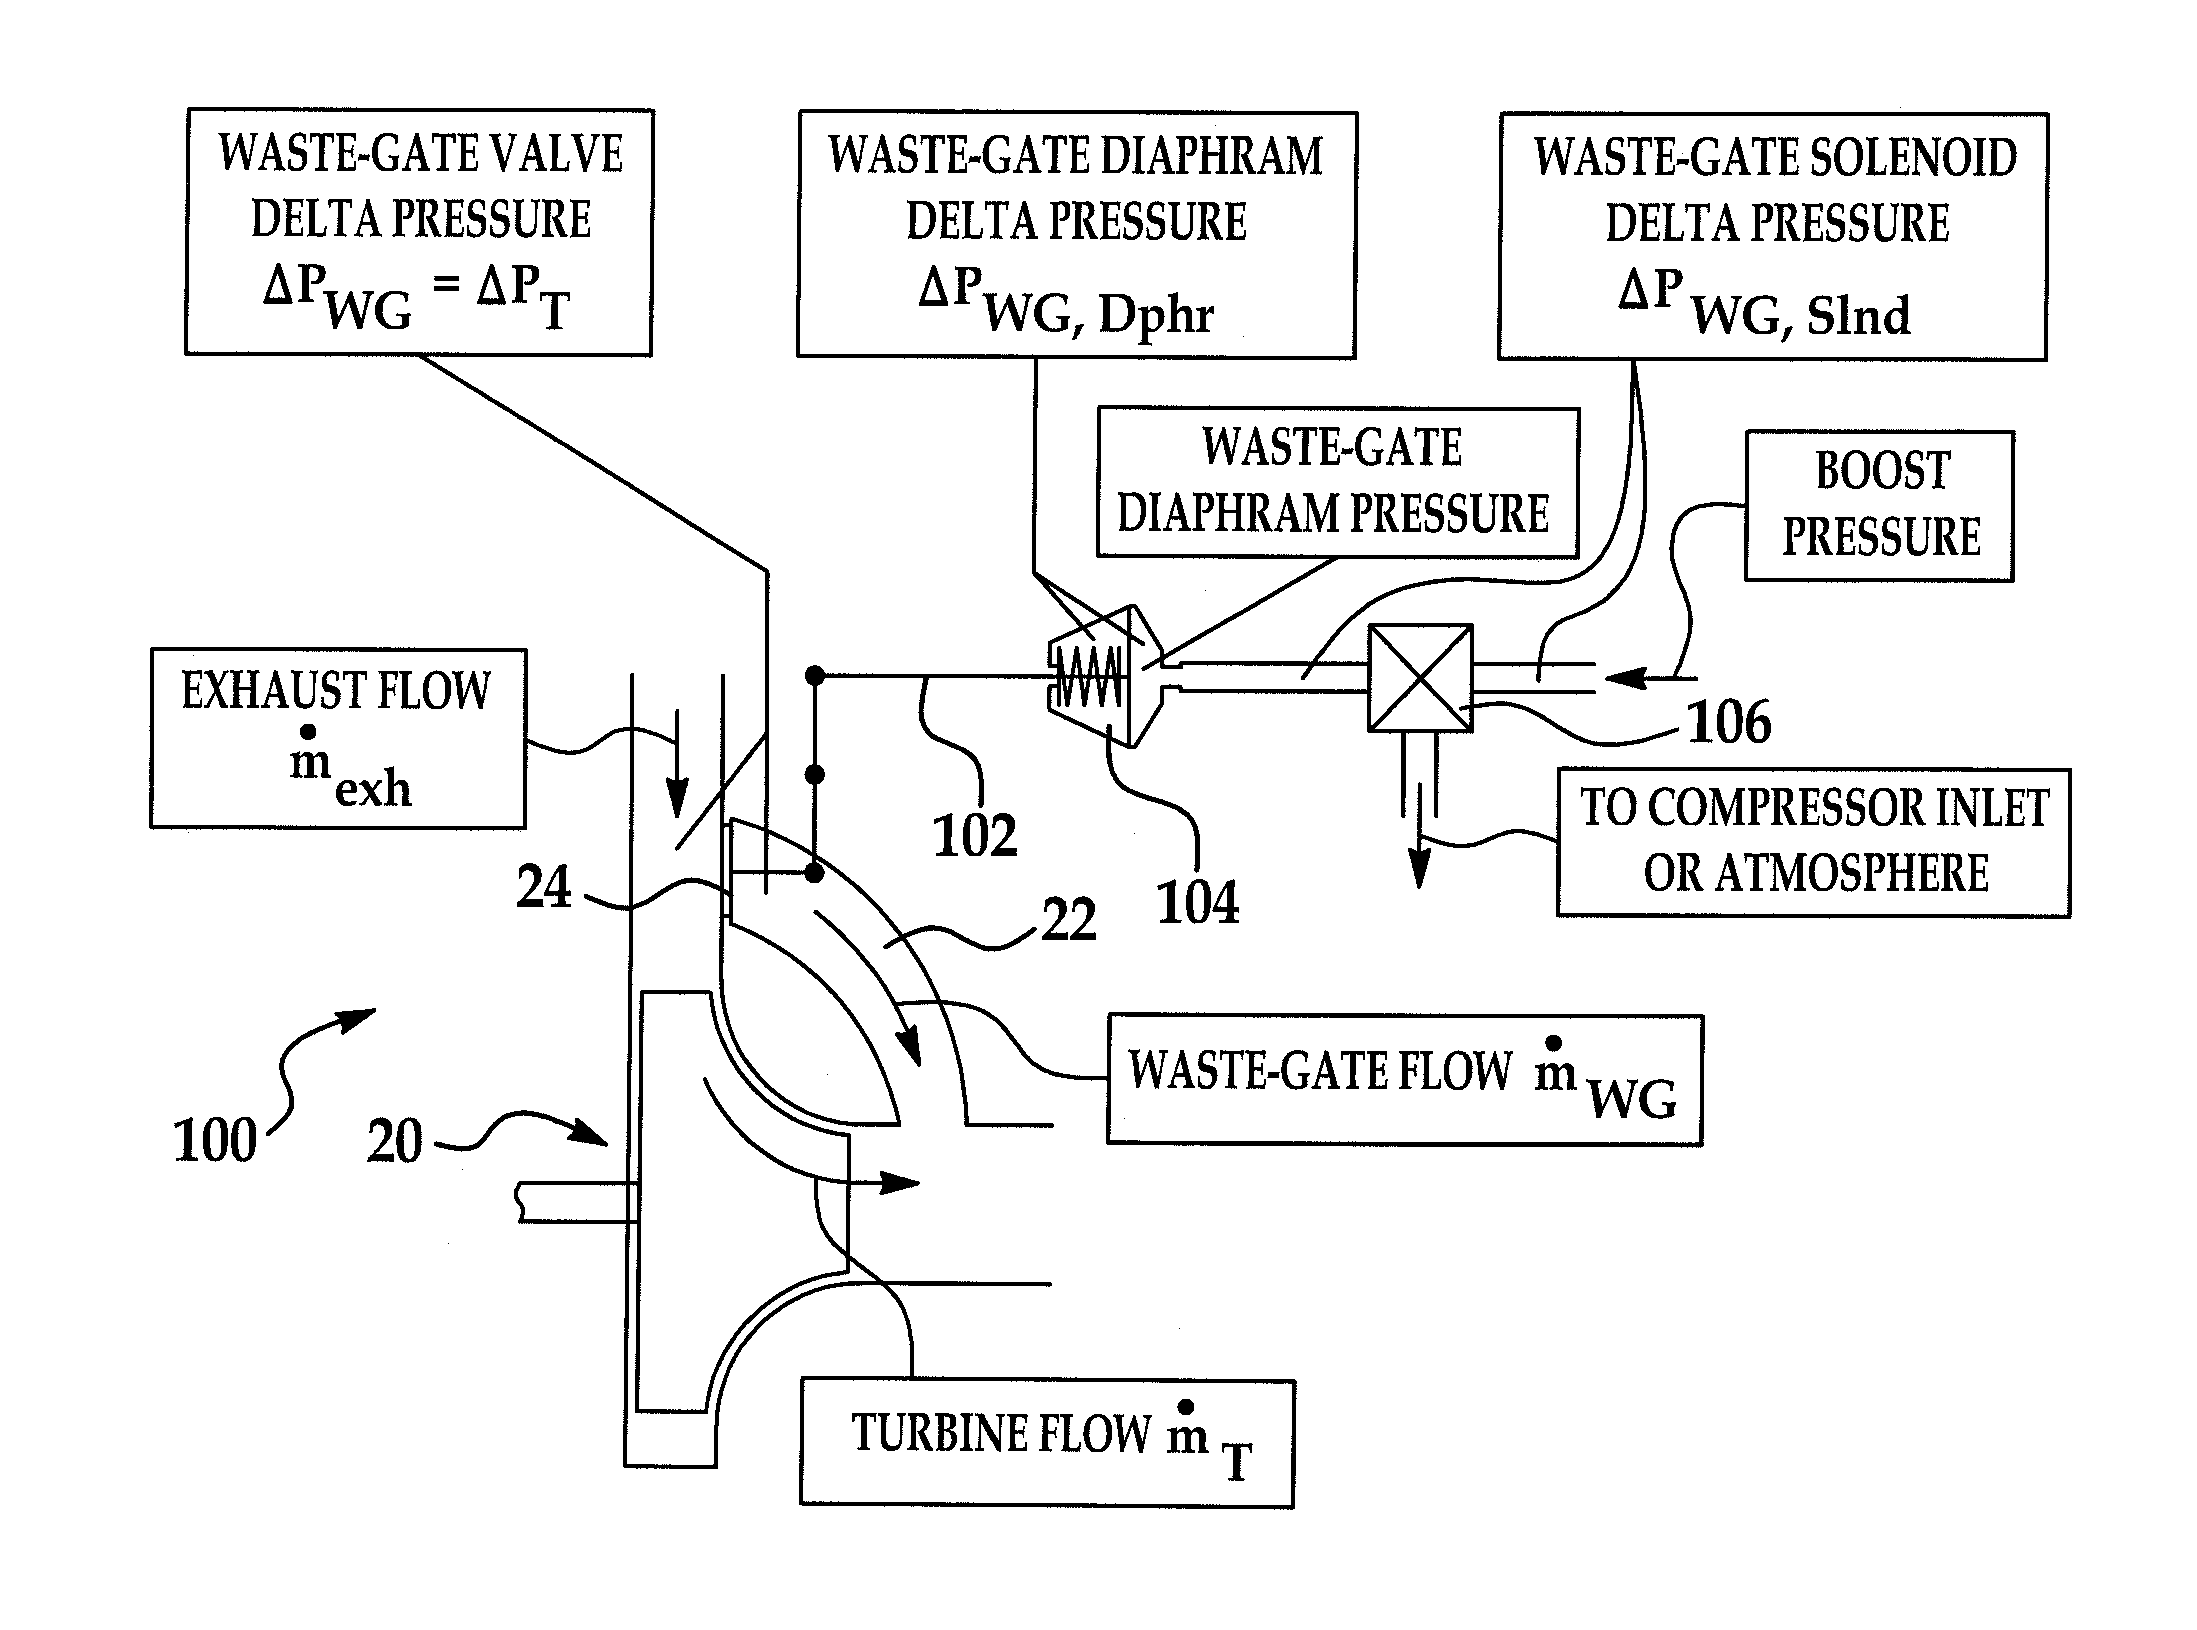 System and method for model based boost control of turbo-charged engines